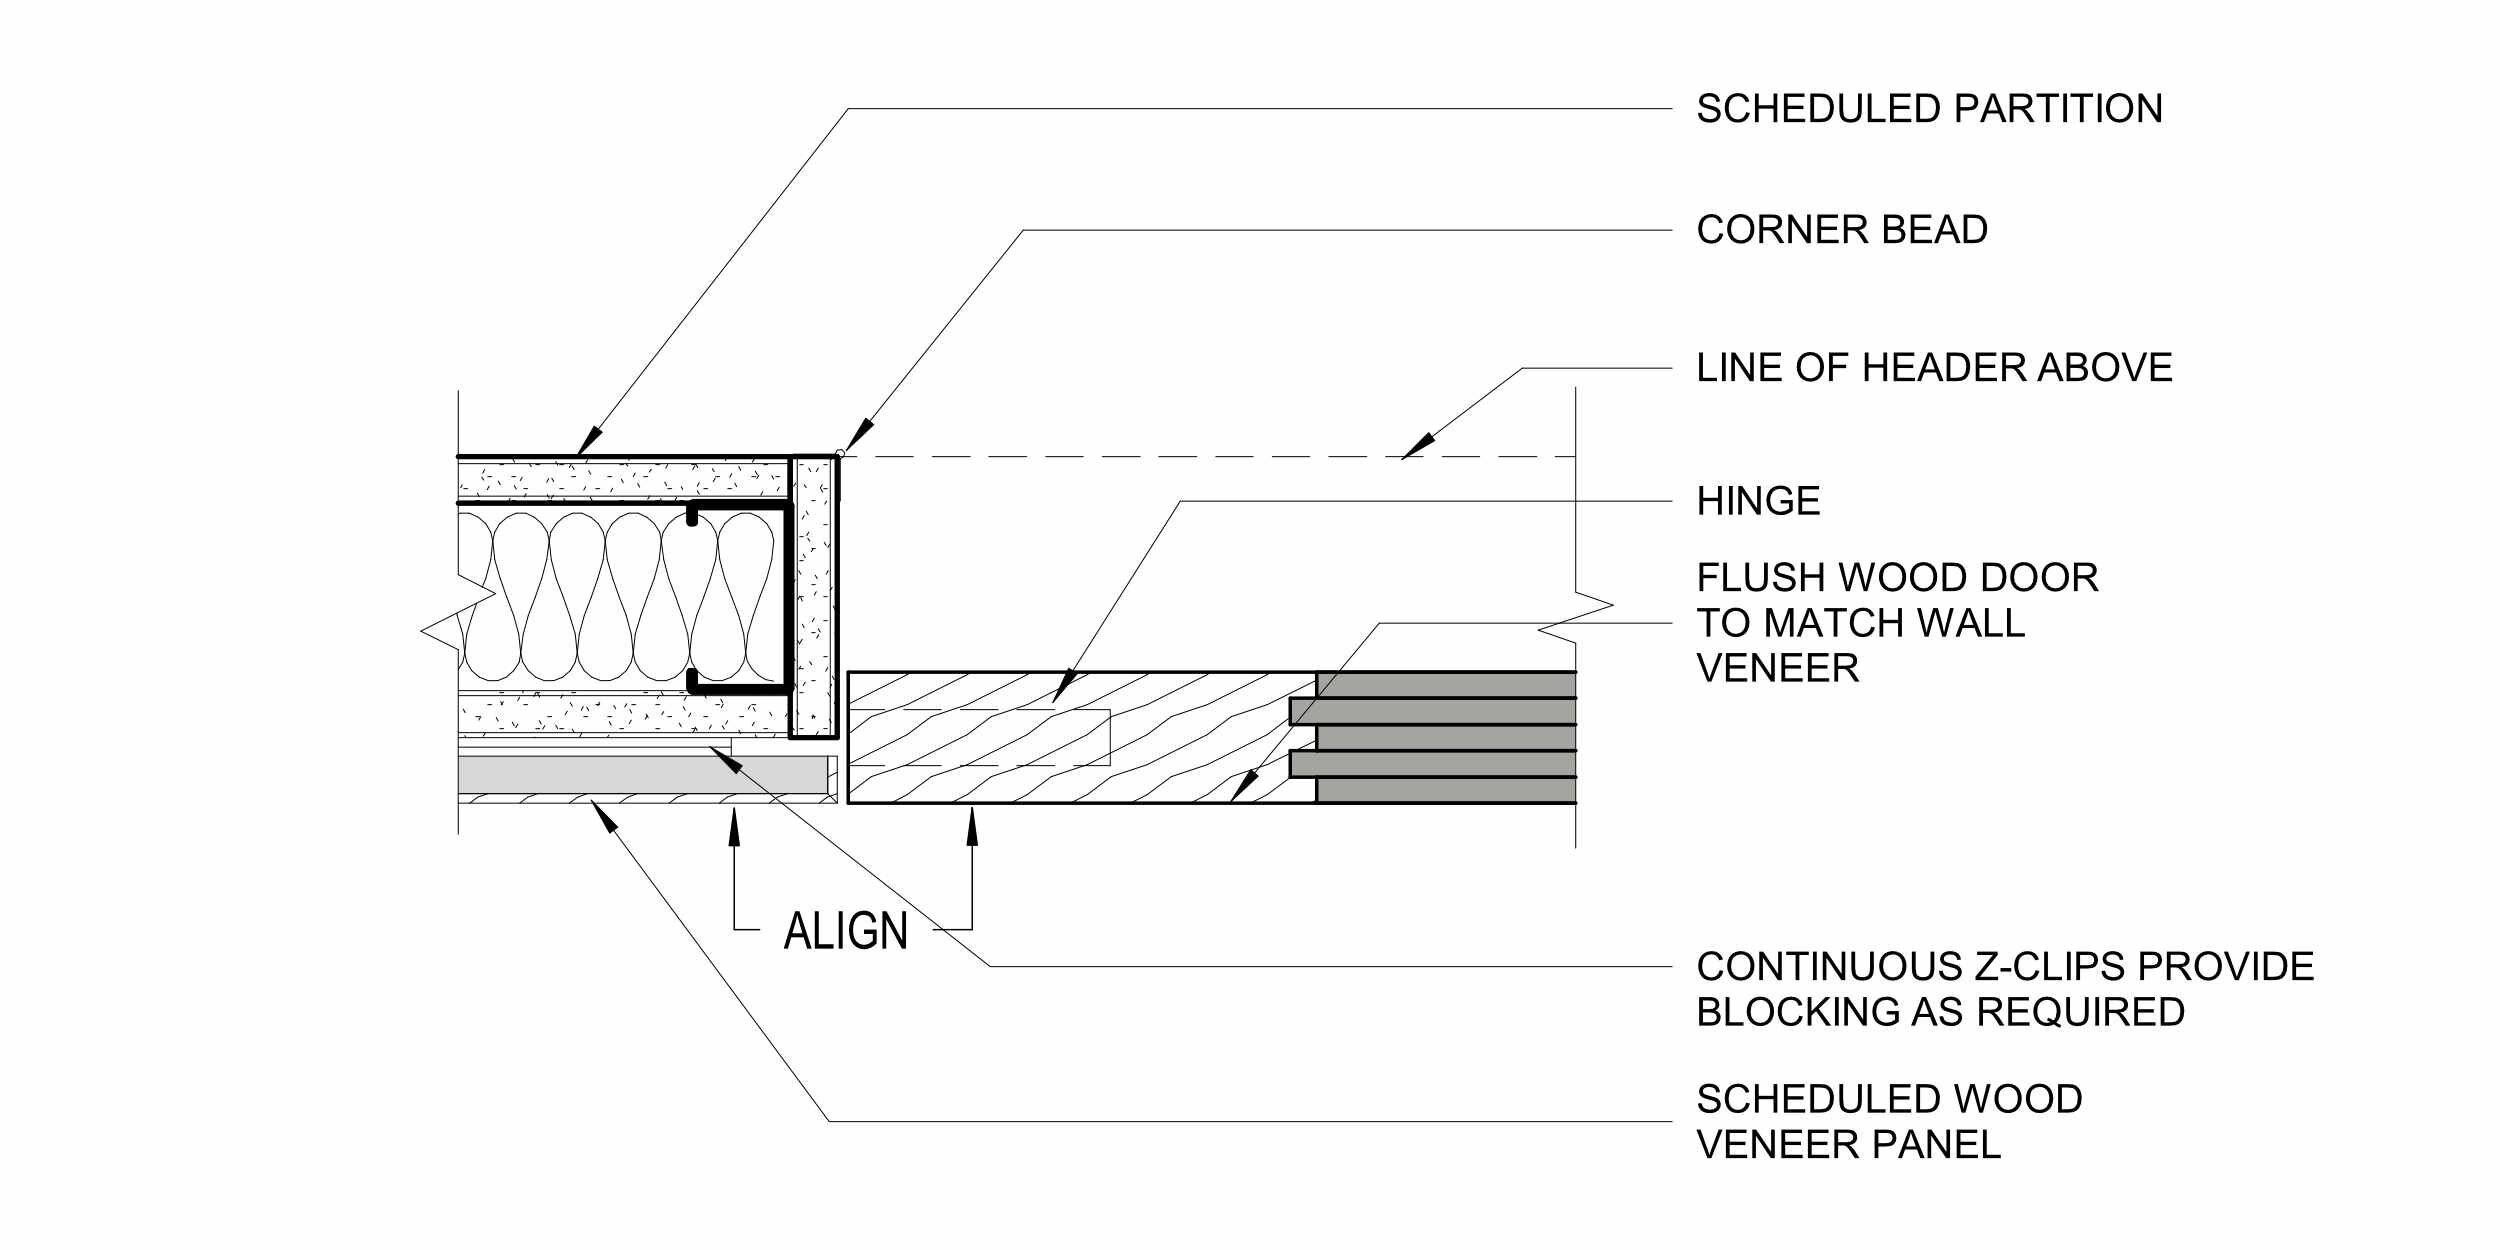 Revit section callout hatching and linework detail